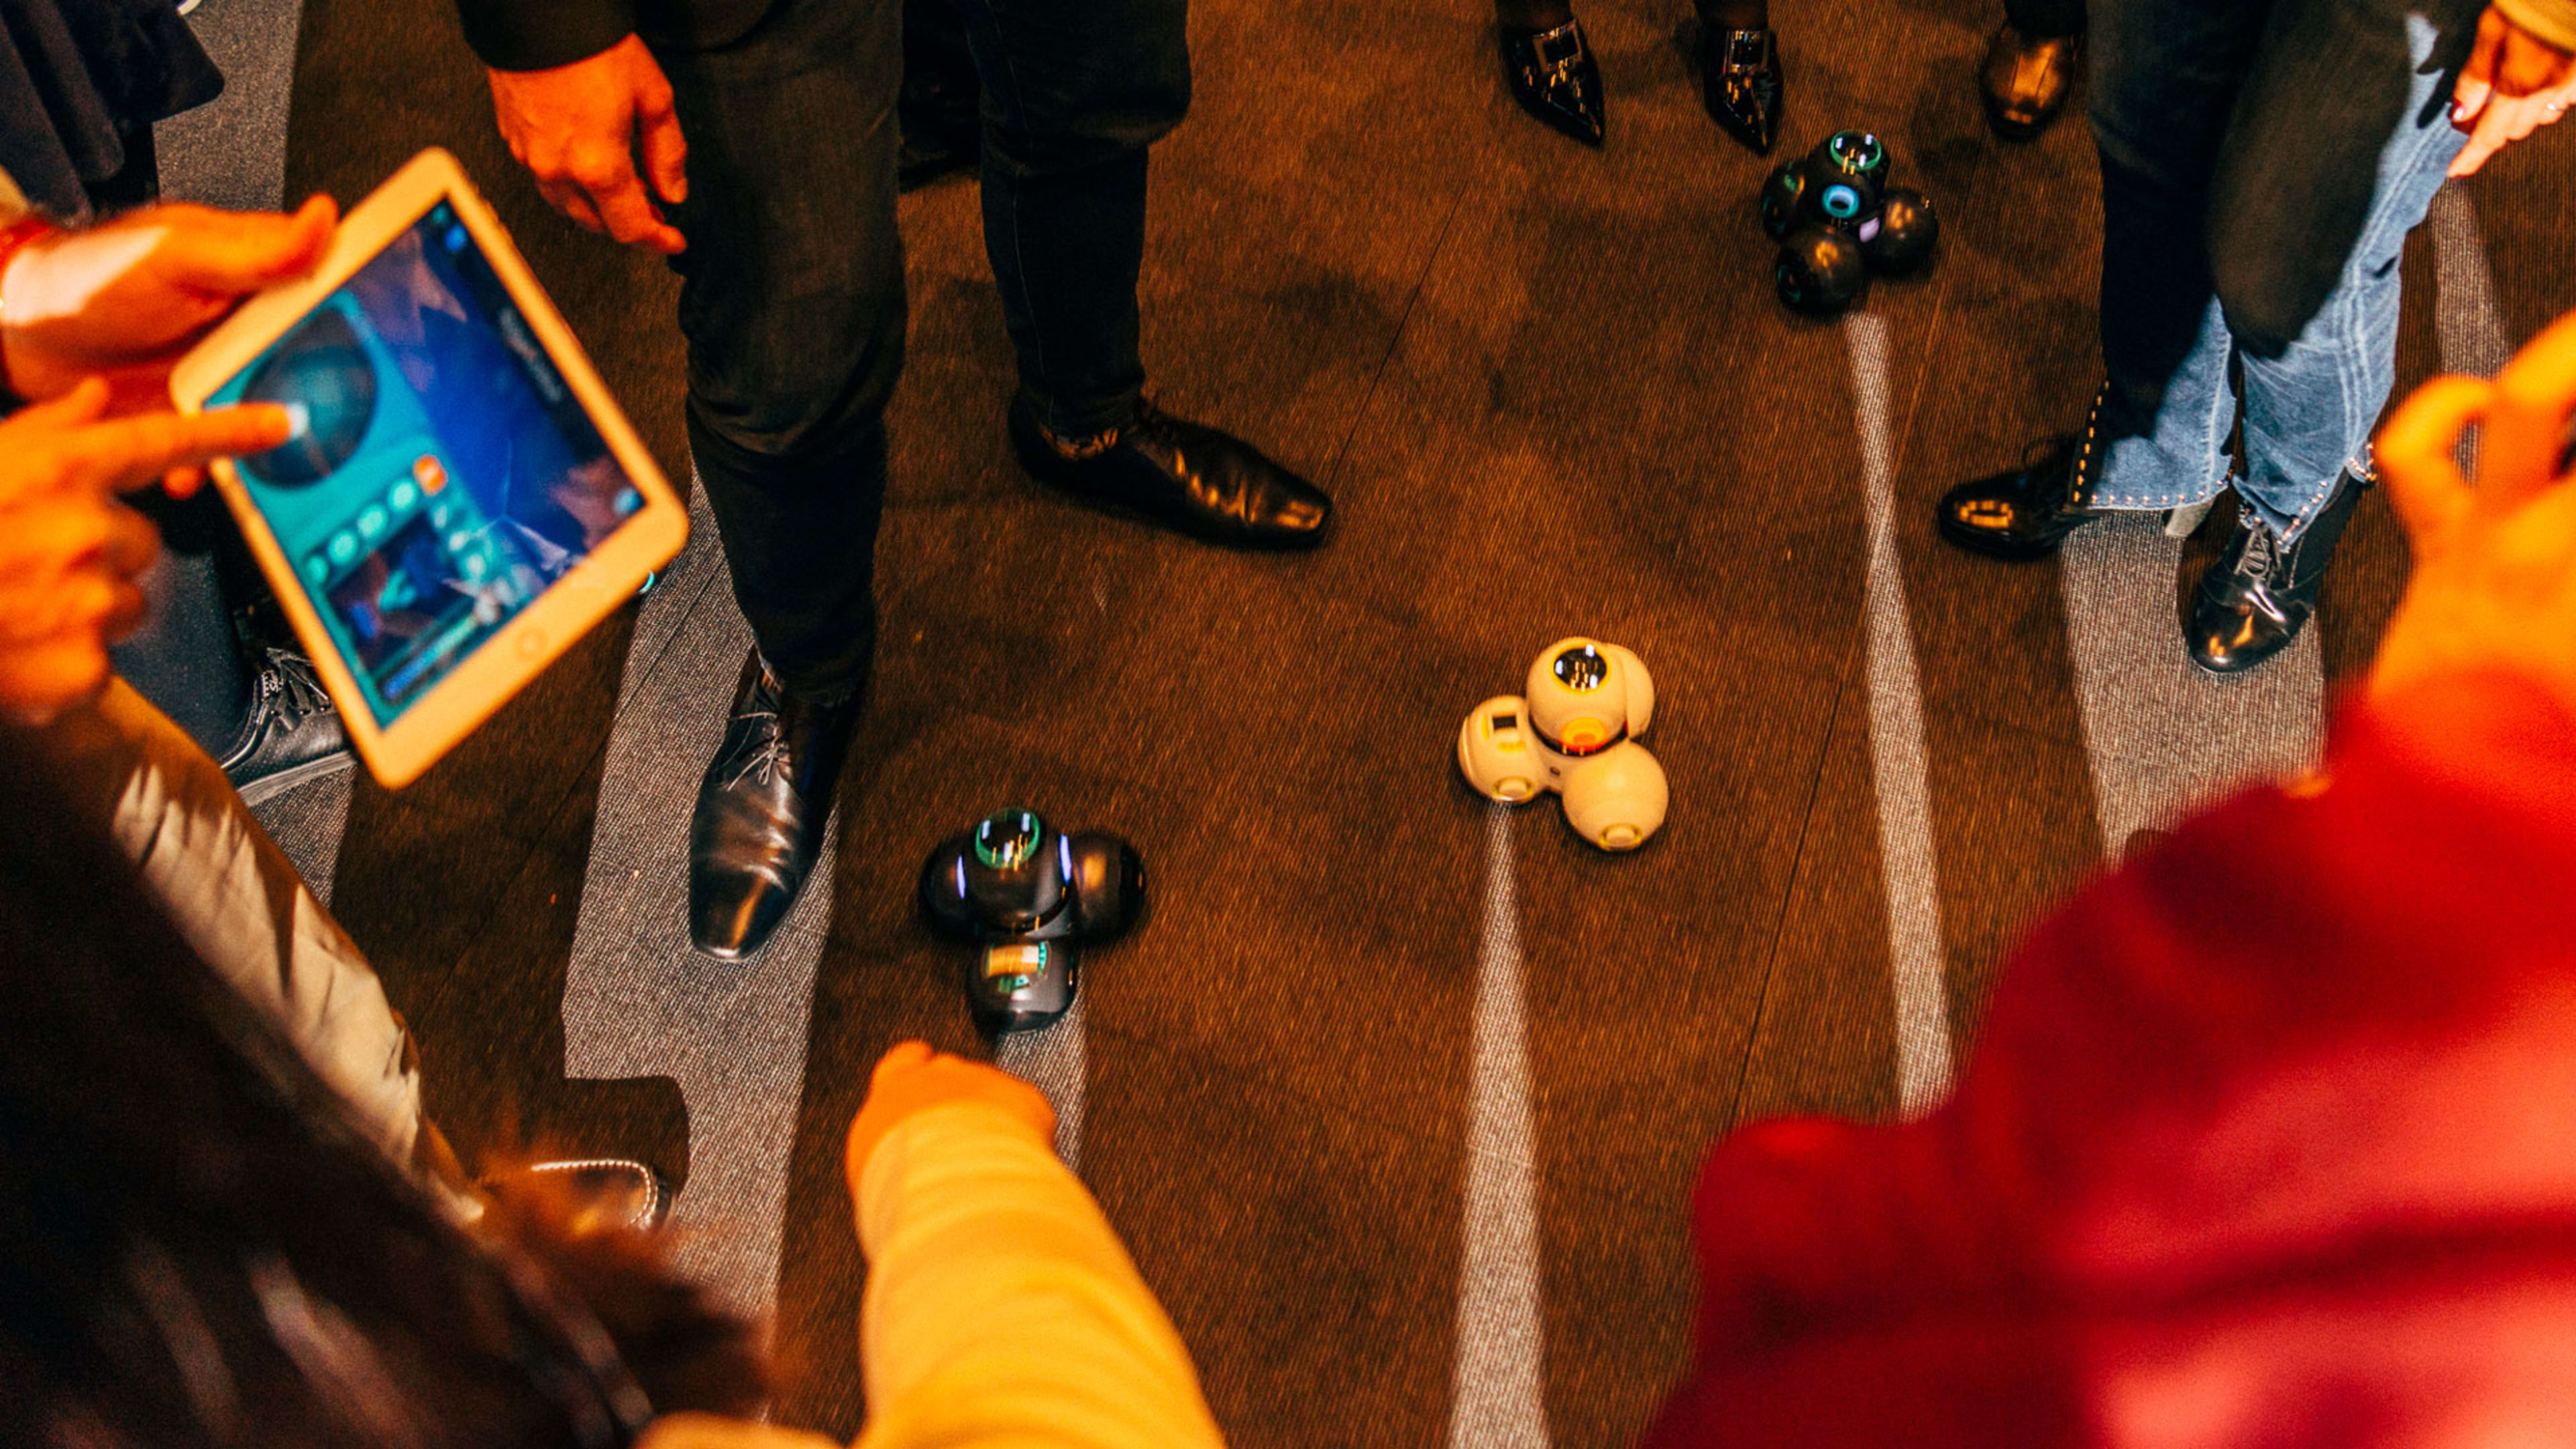 Wonder Workshop’s Robots Teach Kids To Be Coders Of The Future